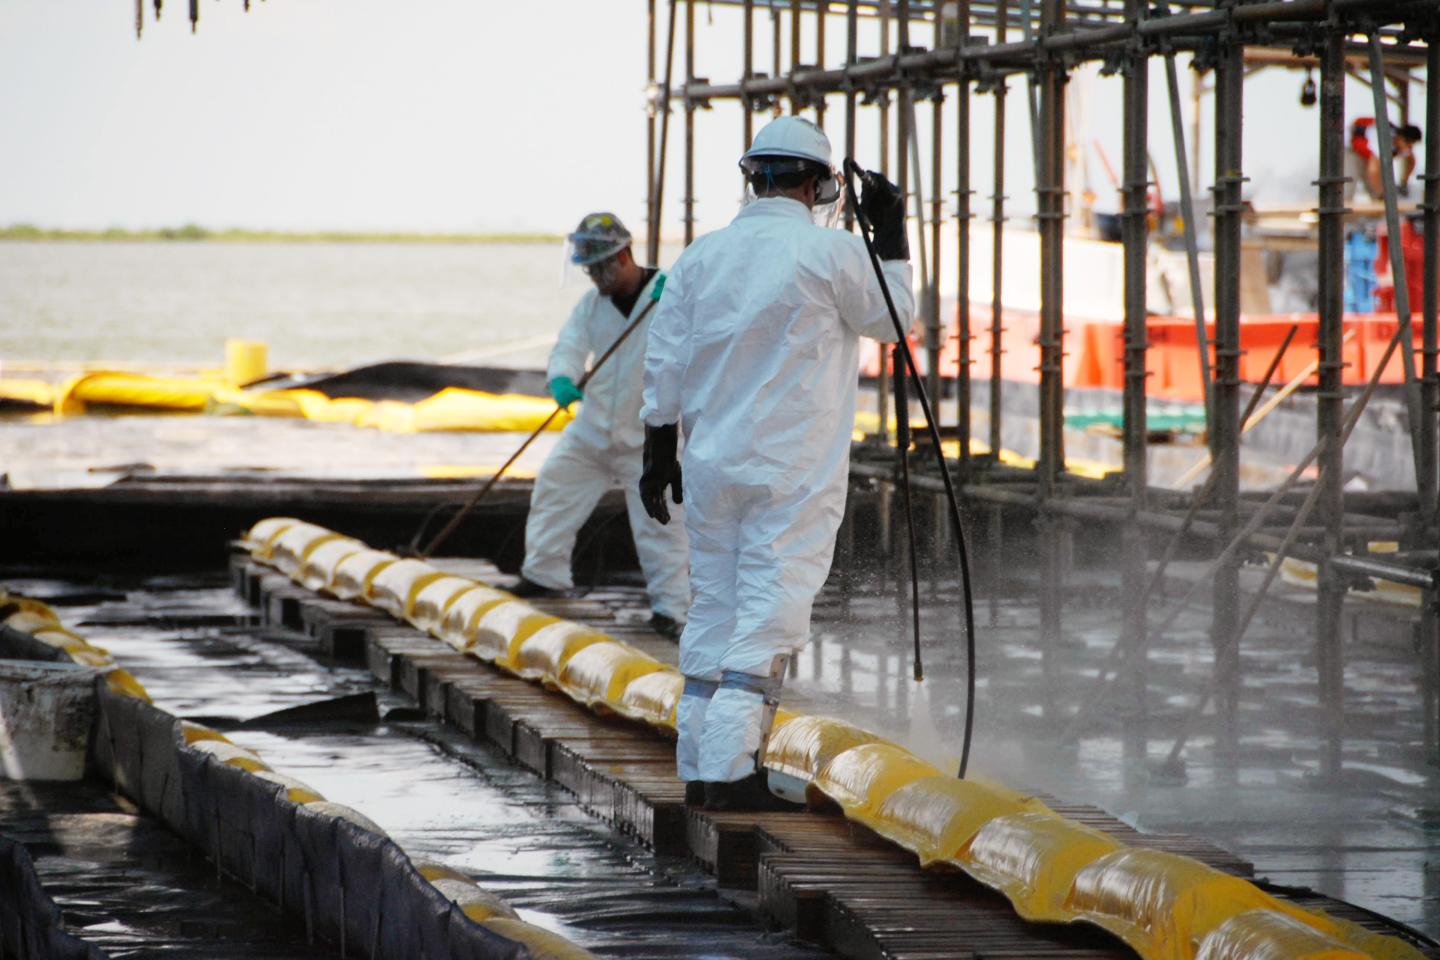 Workers in protective suits hose down a large yellow inflated hose used to contain the oil spill